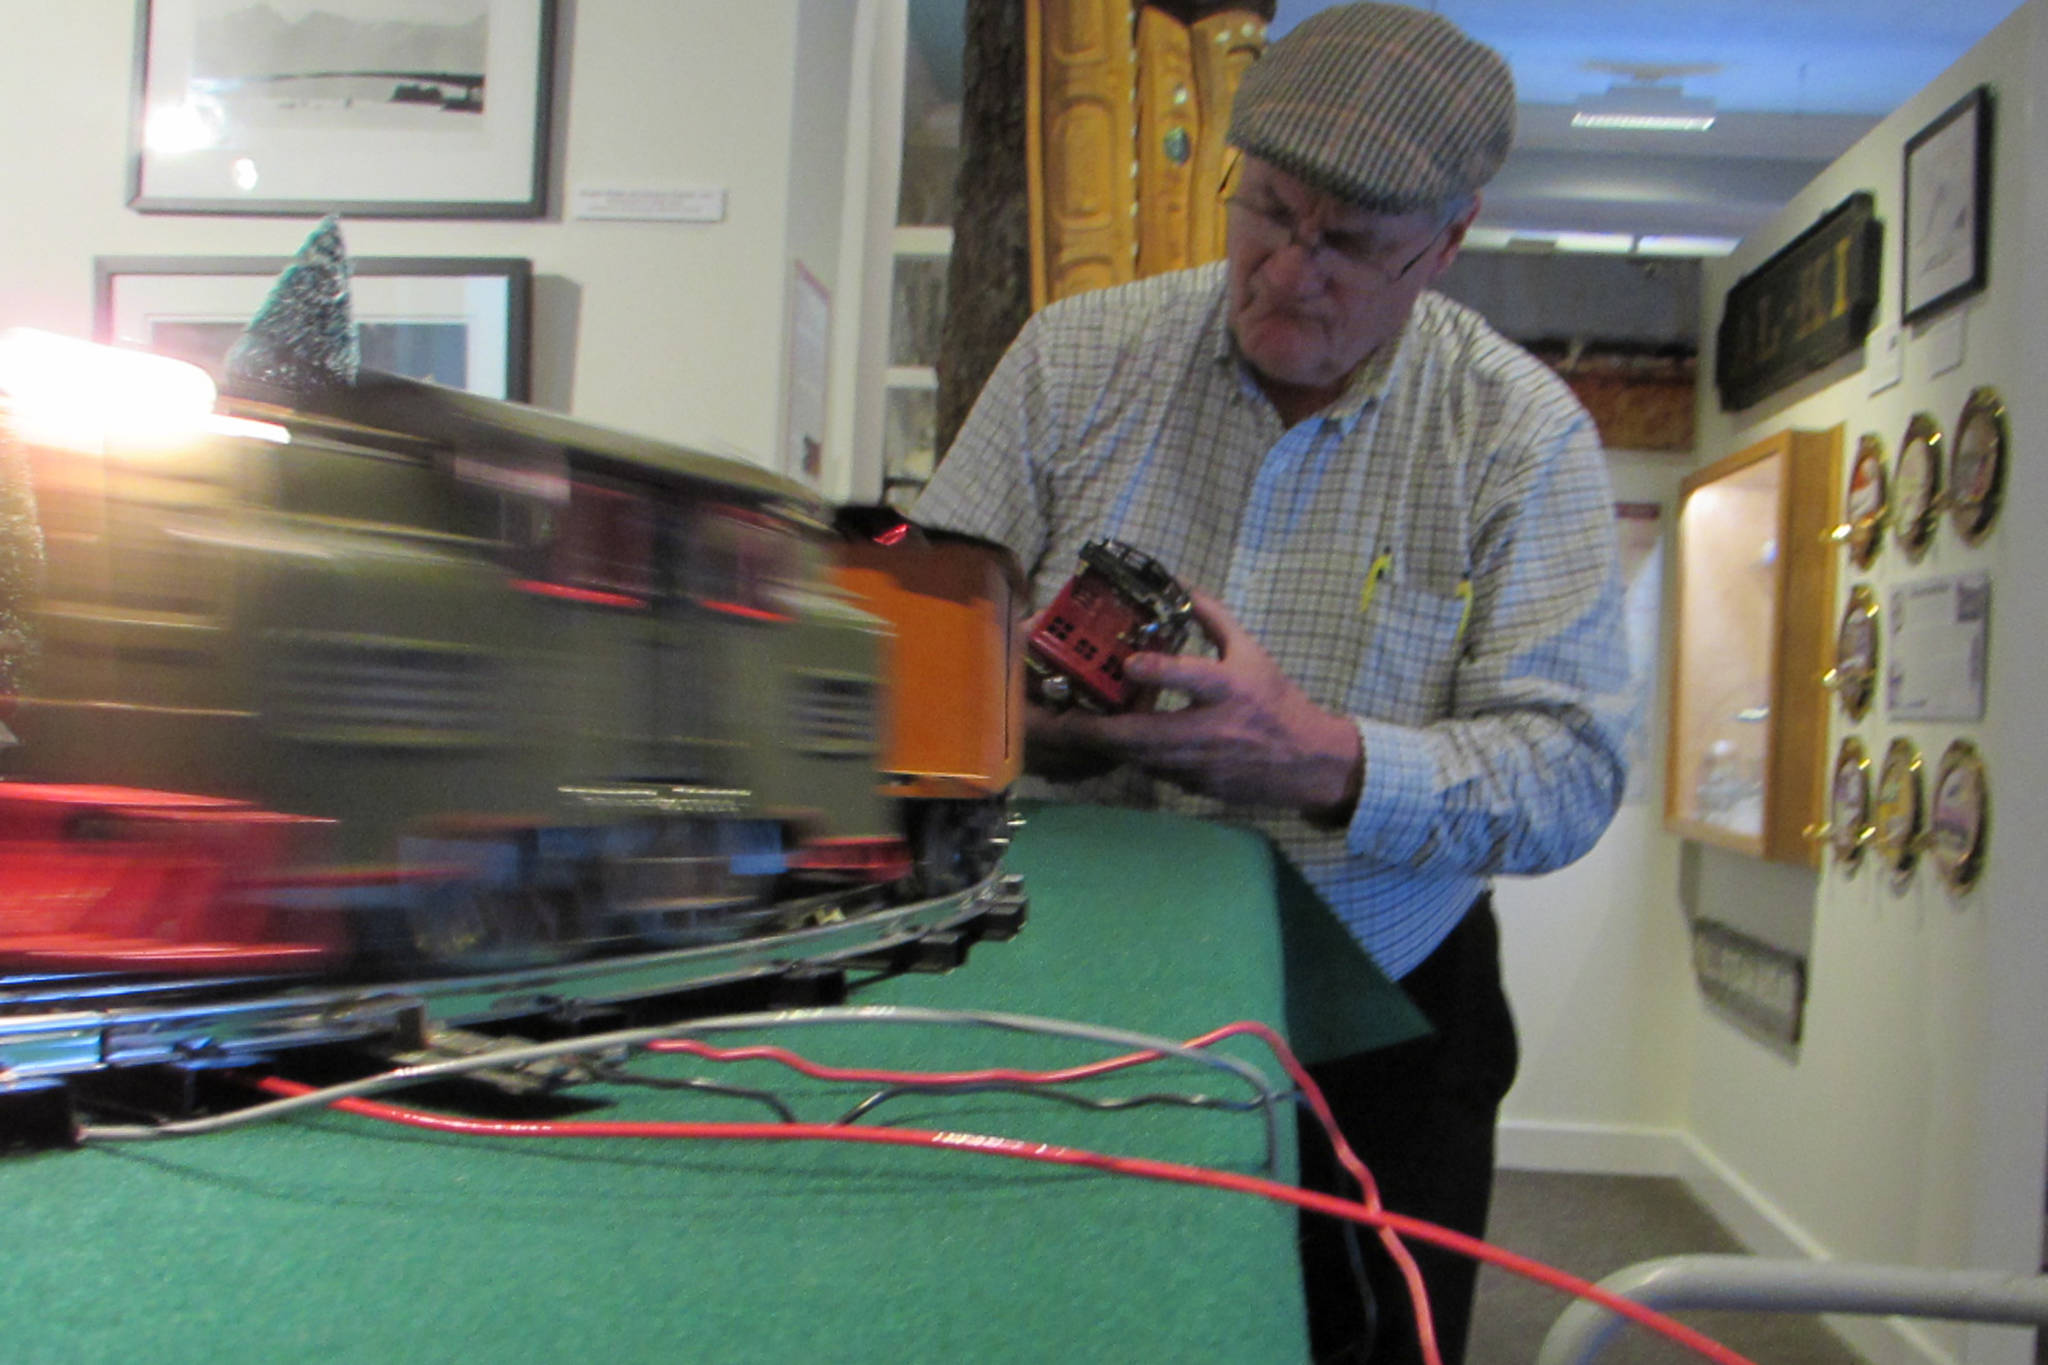 Mike Orford adjusts one of his model trains while another zips along its tracks in the Juneau-Douglas City Museum, Saturday, Dec. 22,2018. (Ben Hohenstatt | Capital City Weekly)